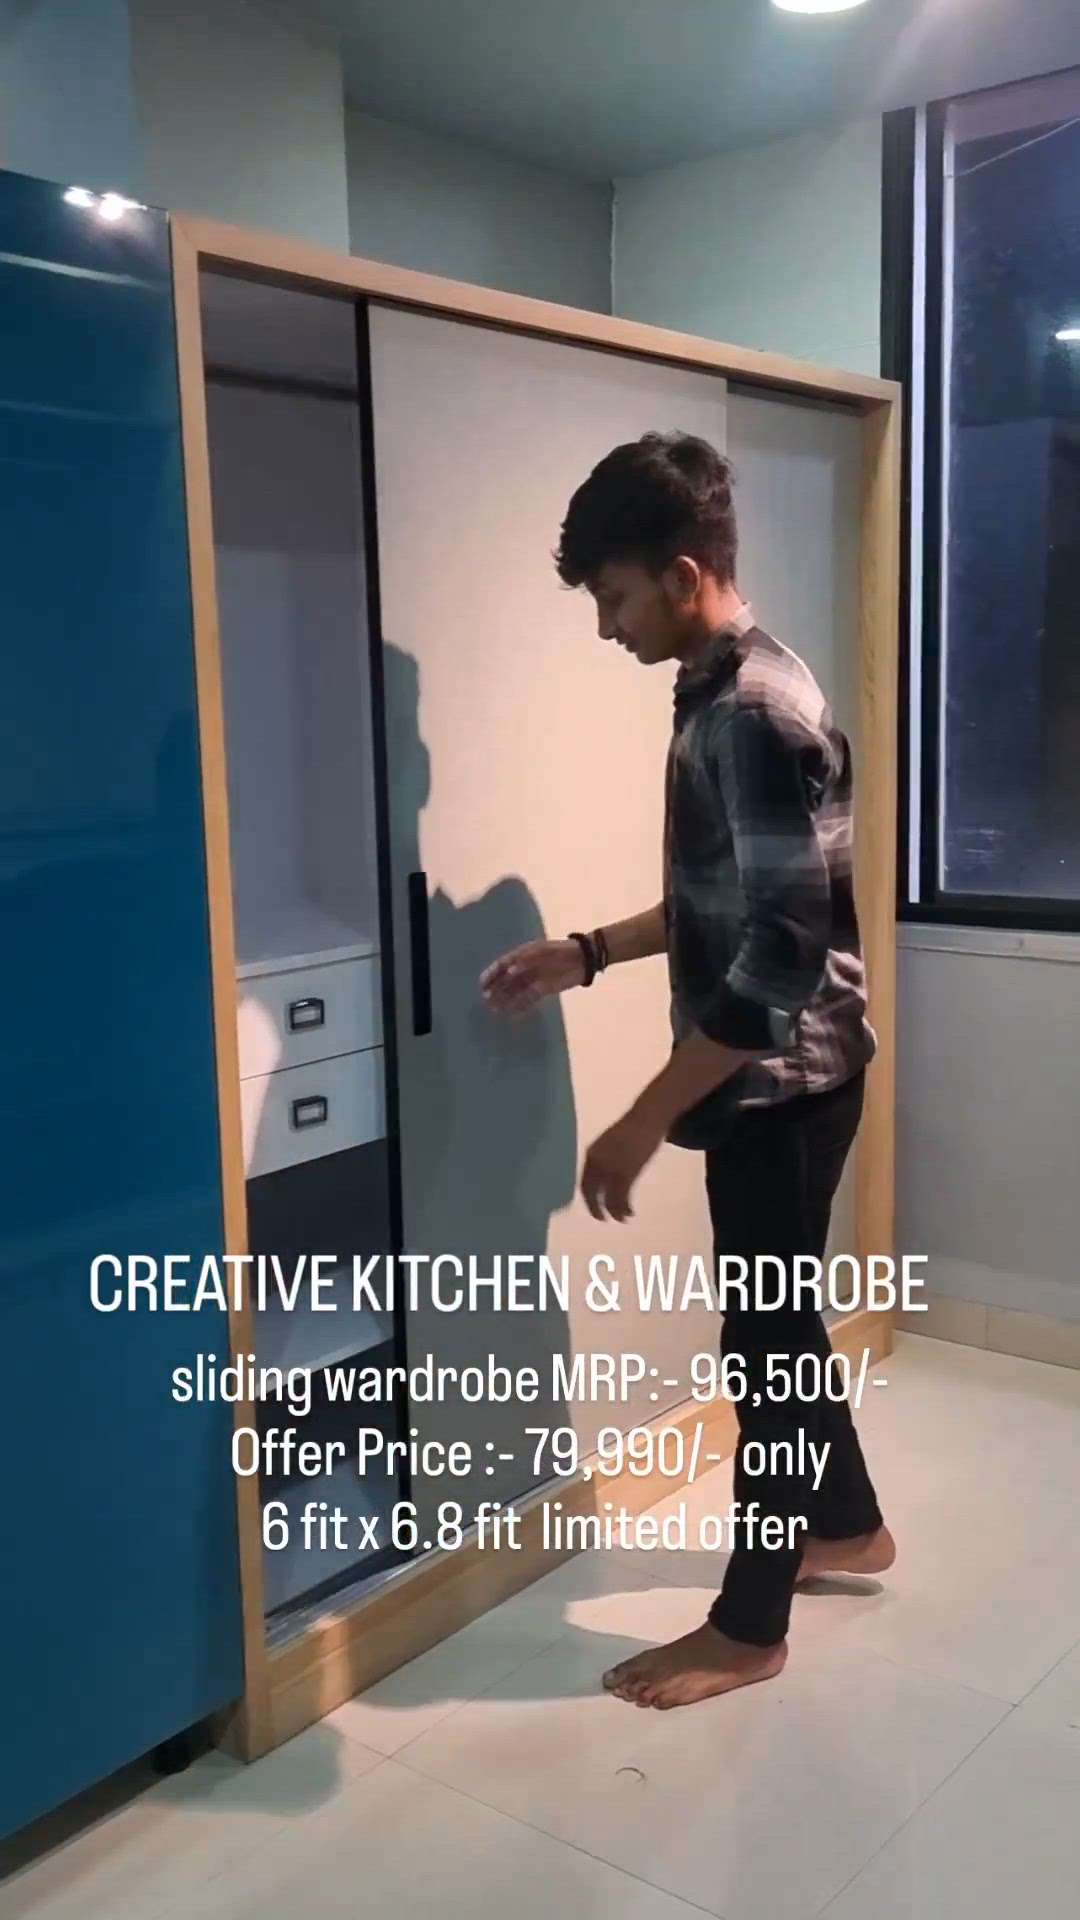 @creative_kitchen_and_wardrobe
@creative_kitchen_gallery
Sliding wardrobe only 79,990/- 
10 year warranty 
Limited Offer 
HDHMR 
6 fit × 6.8 fit 
Water resistant 
termite proof
Sofe cloed 
.
.
.
.
.
.
.
.
.
.
.
.
#kitchendesign
#artwork #wardrobestylist #indore #creative